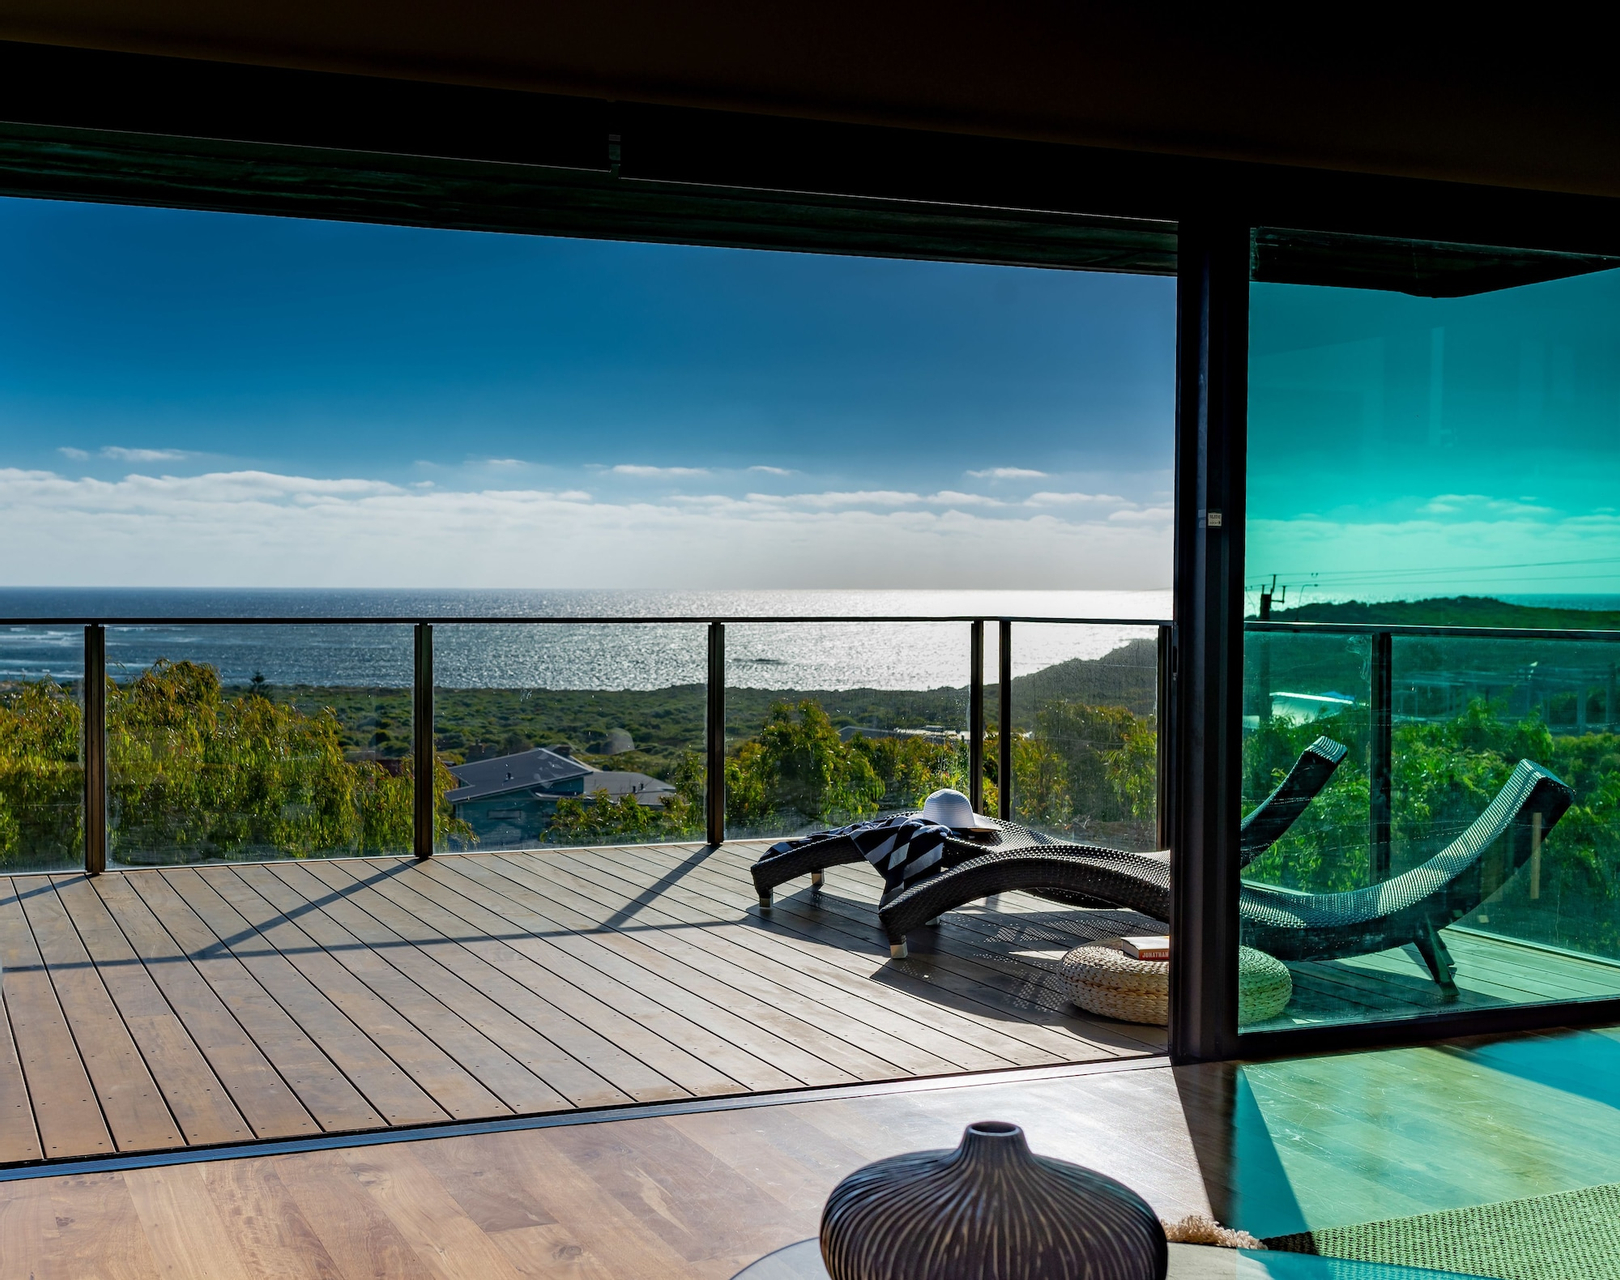 Others 1, The Roozen Residence, Augusta-Margaret River